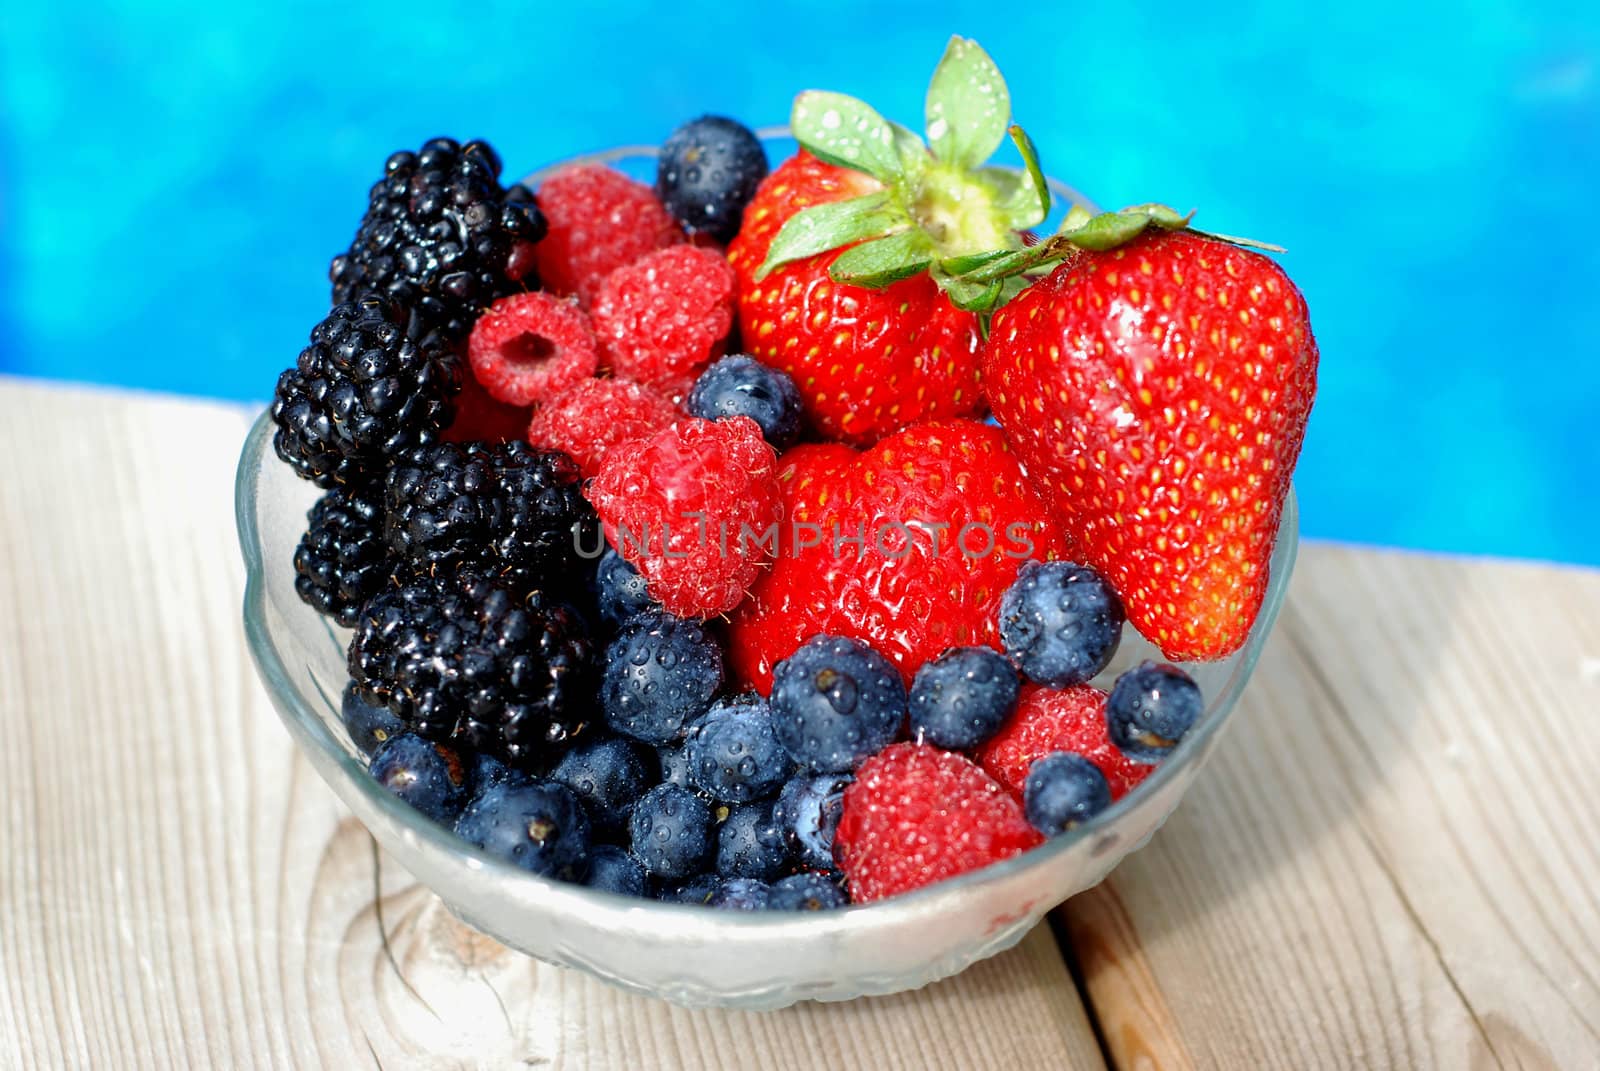 Bowl of mixed berries on a wooden deck near a pool